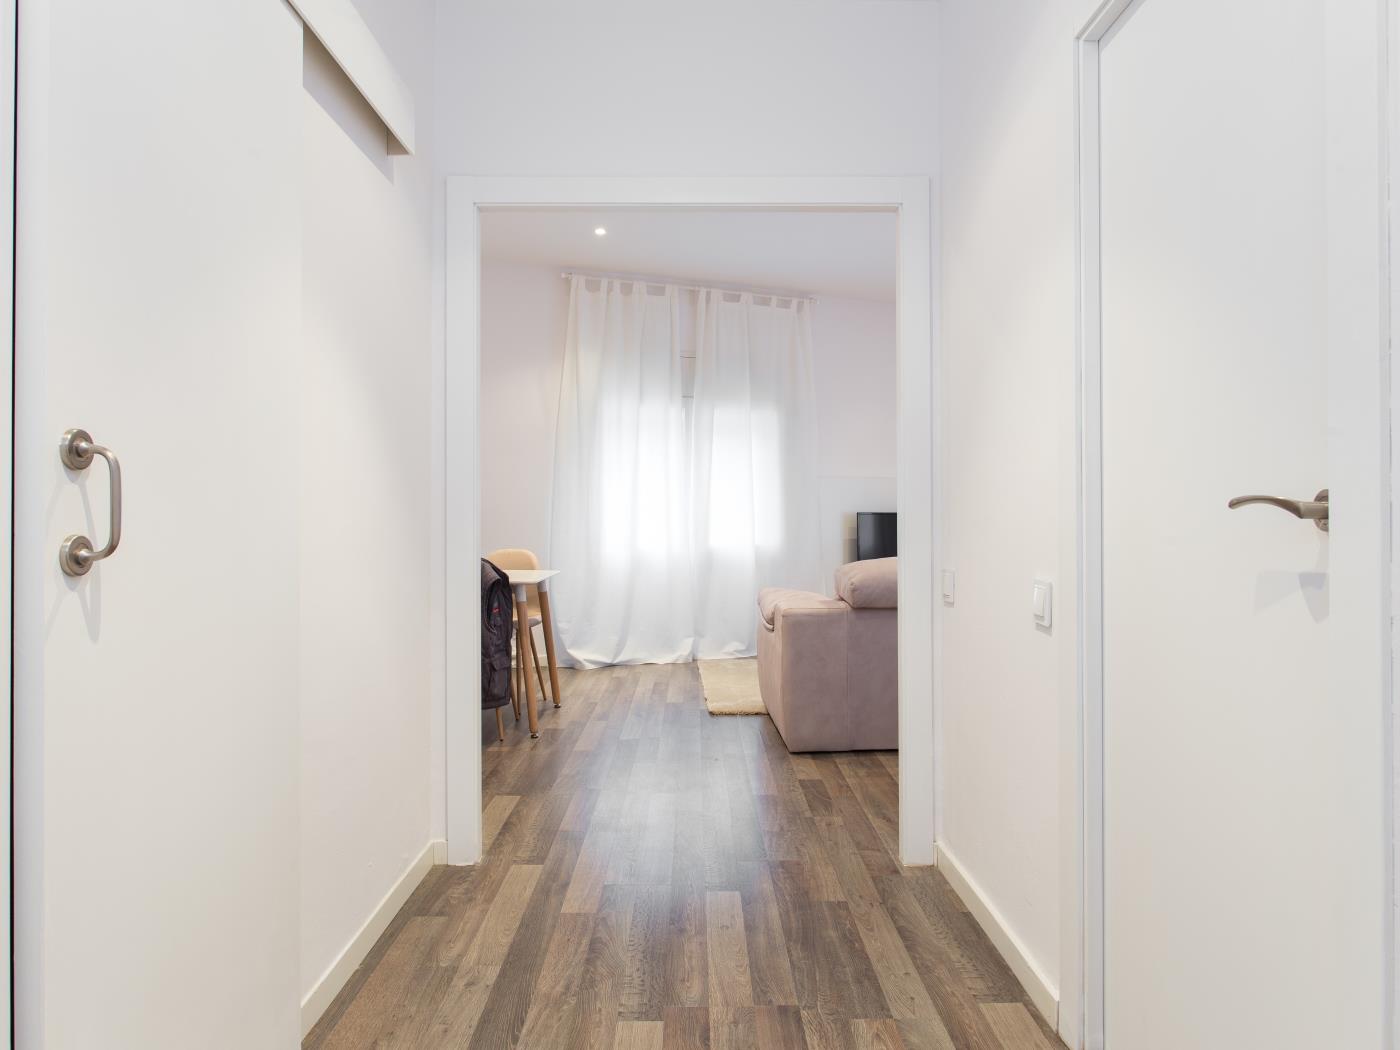 Charming apartment in the Putxet ideal for couples for monthly rentals - My Space Barcelona Apartments